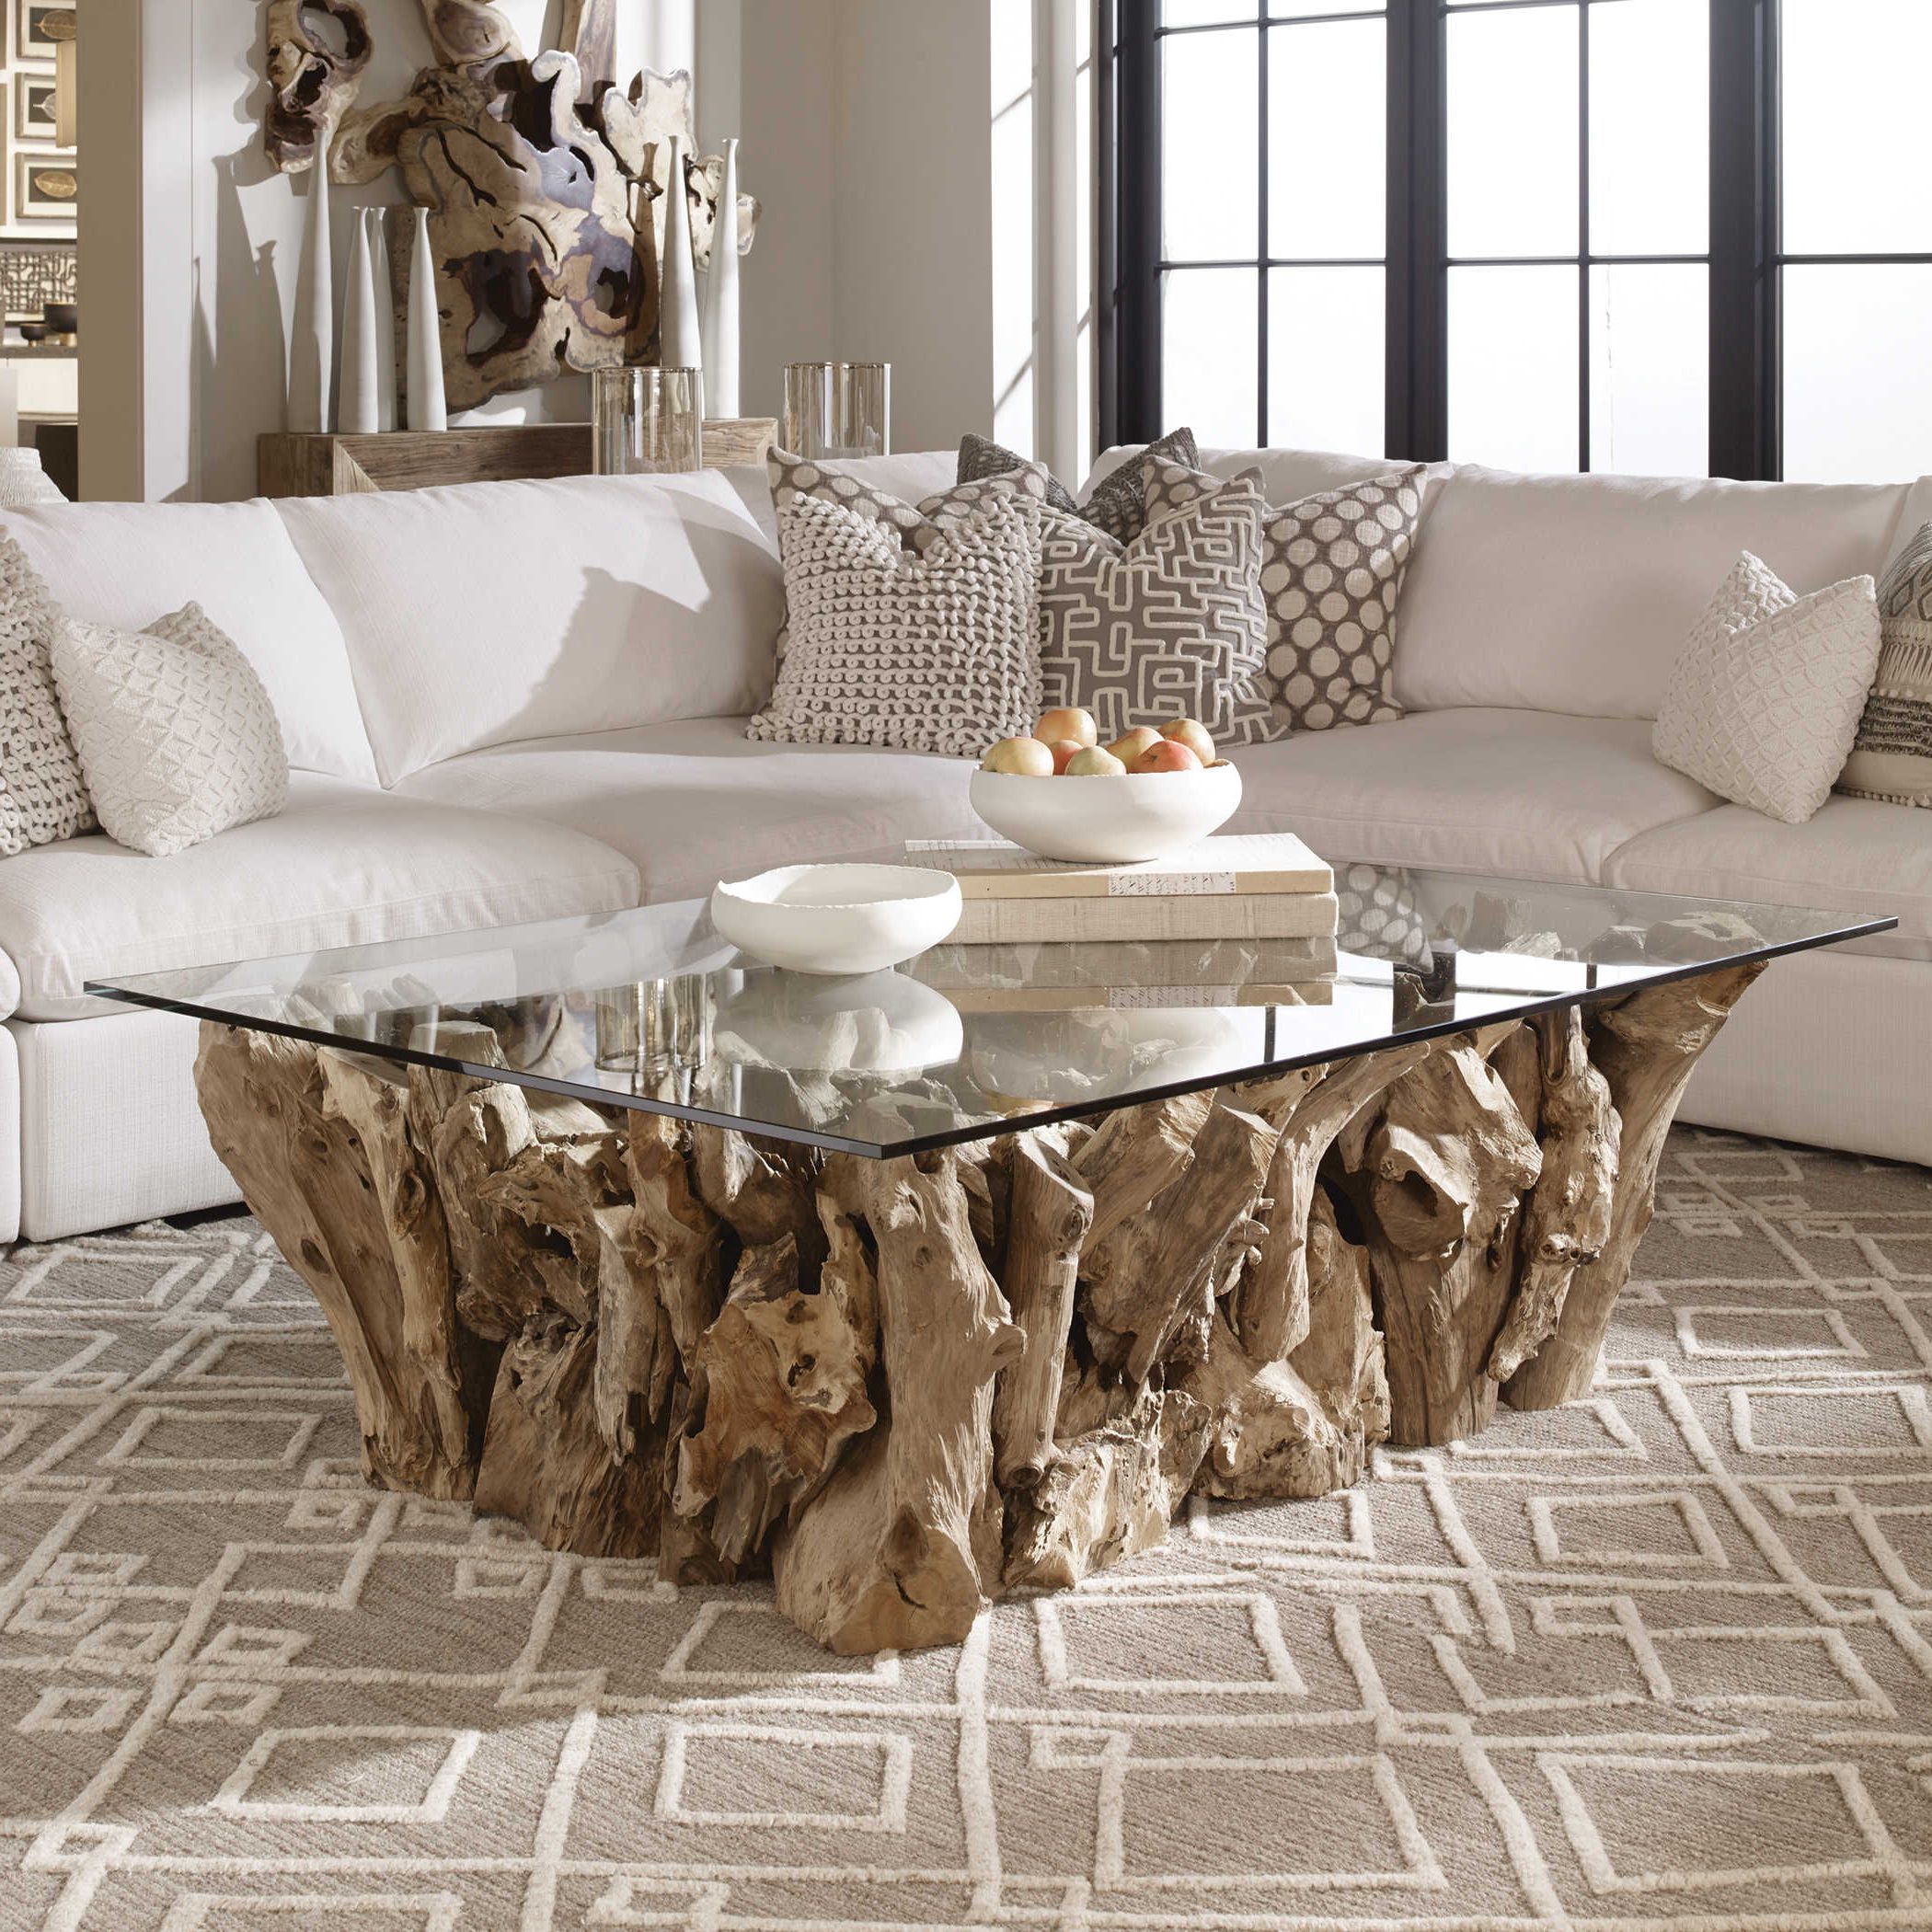 Uttermost Pertaining To Best And Newest Teak Coffee Tables (Gallery 20 of 20)